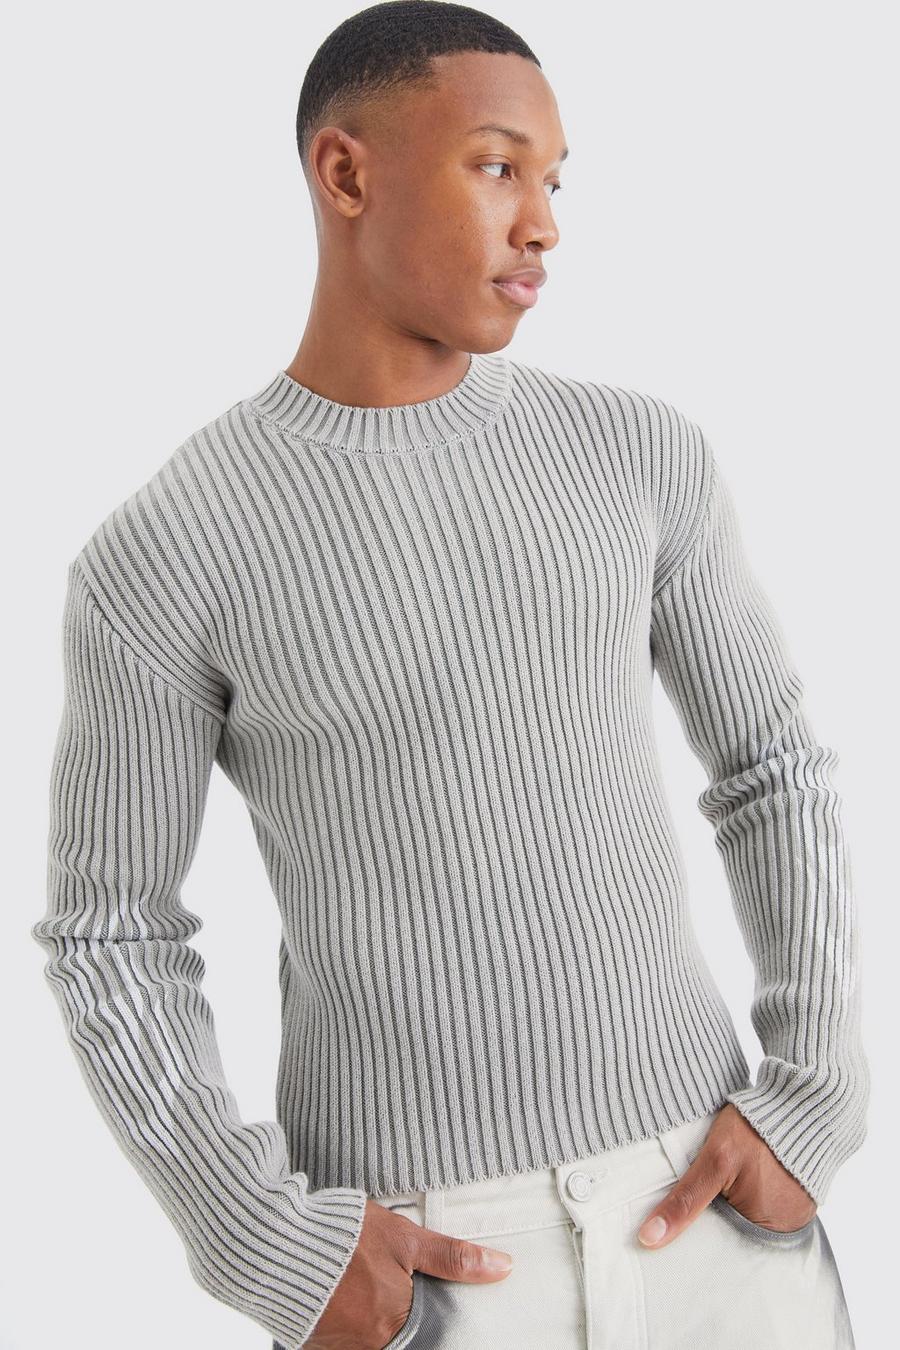 Gerippter Muscle-Fit Strickpullover mit Acid-Waschung, Stone